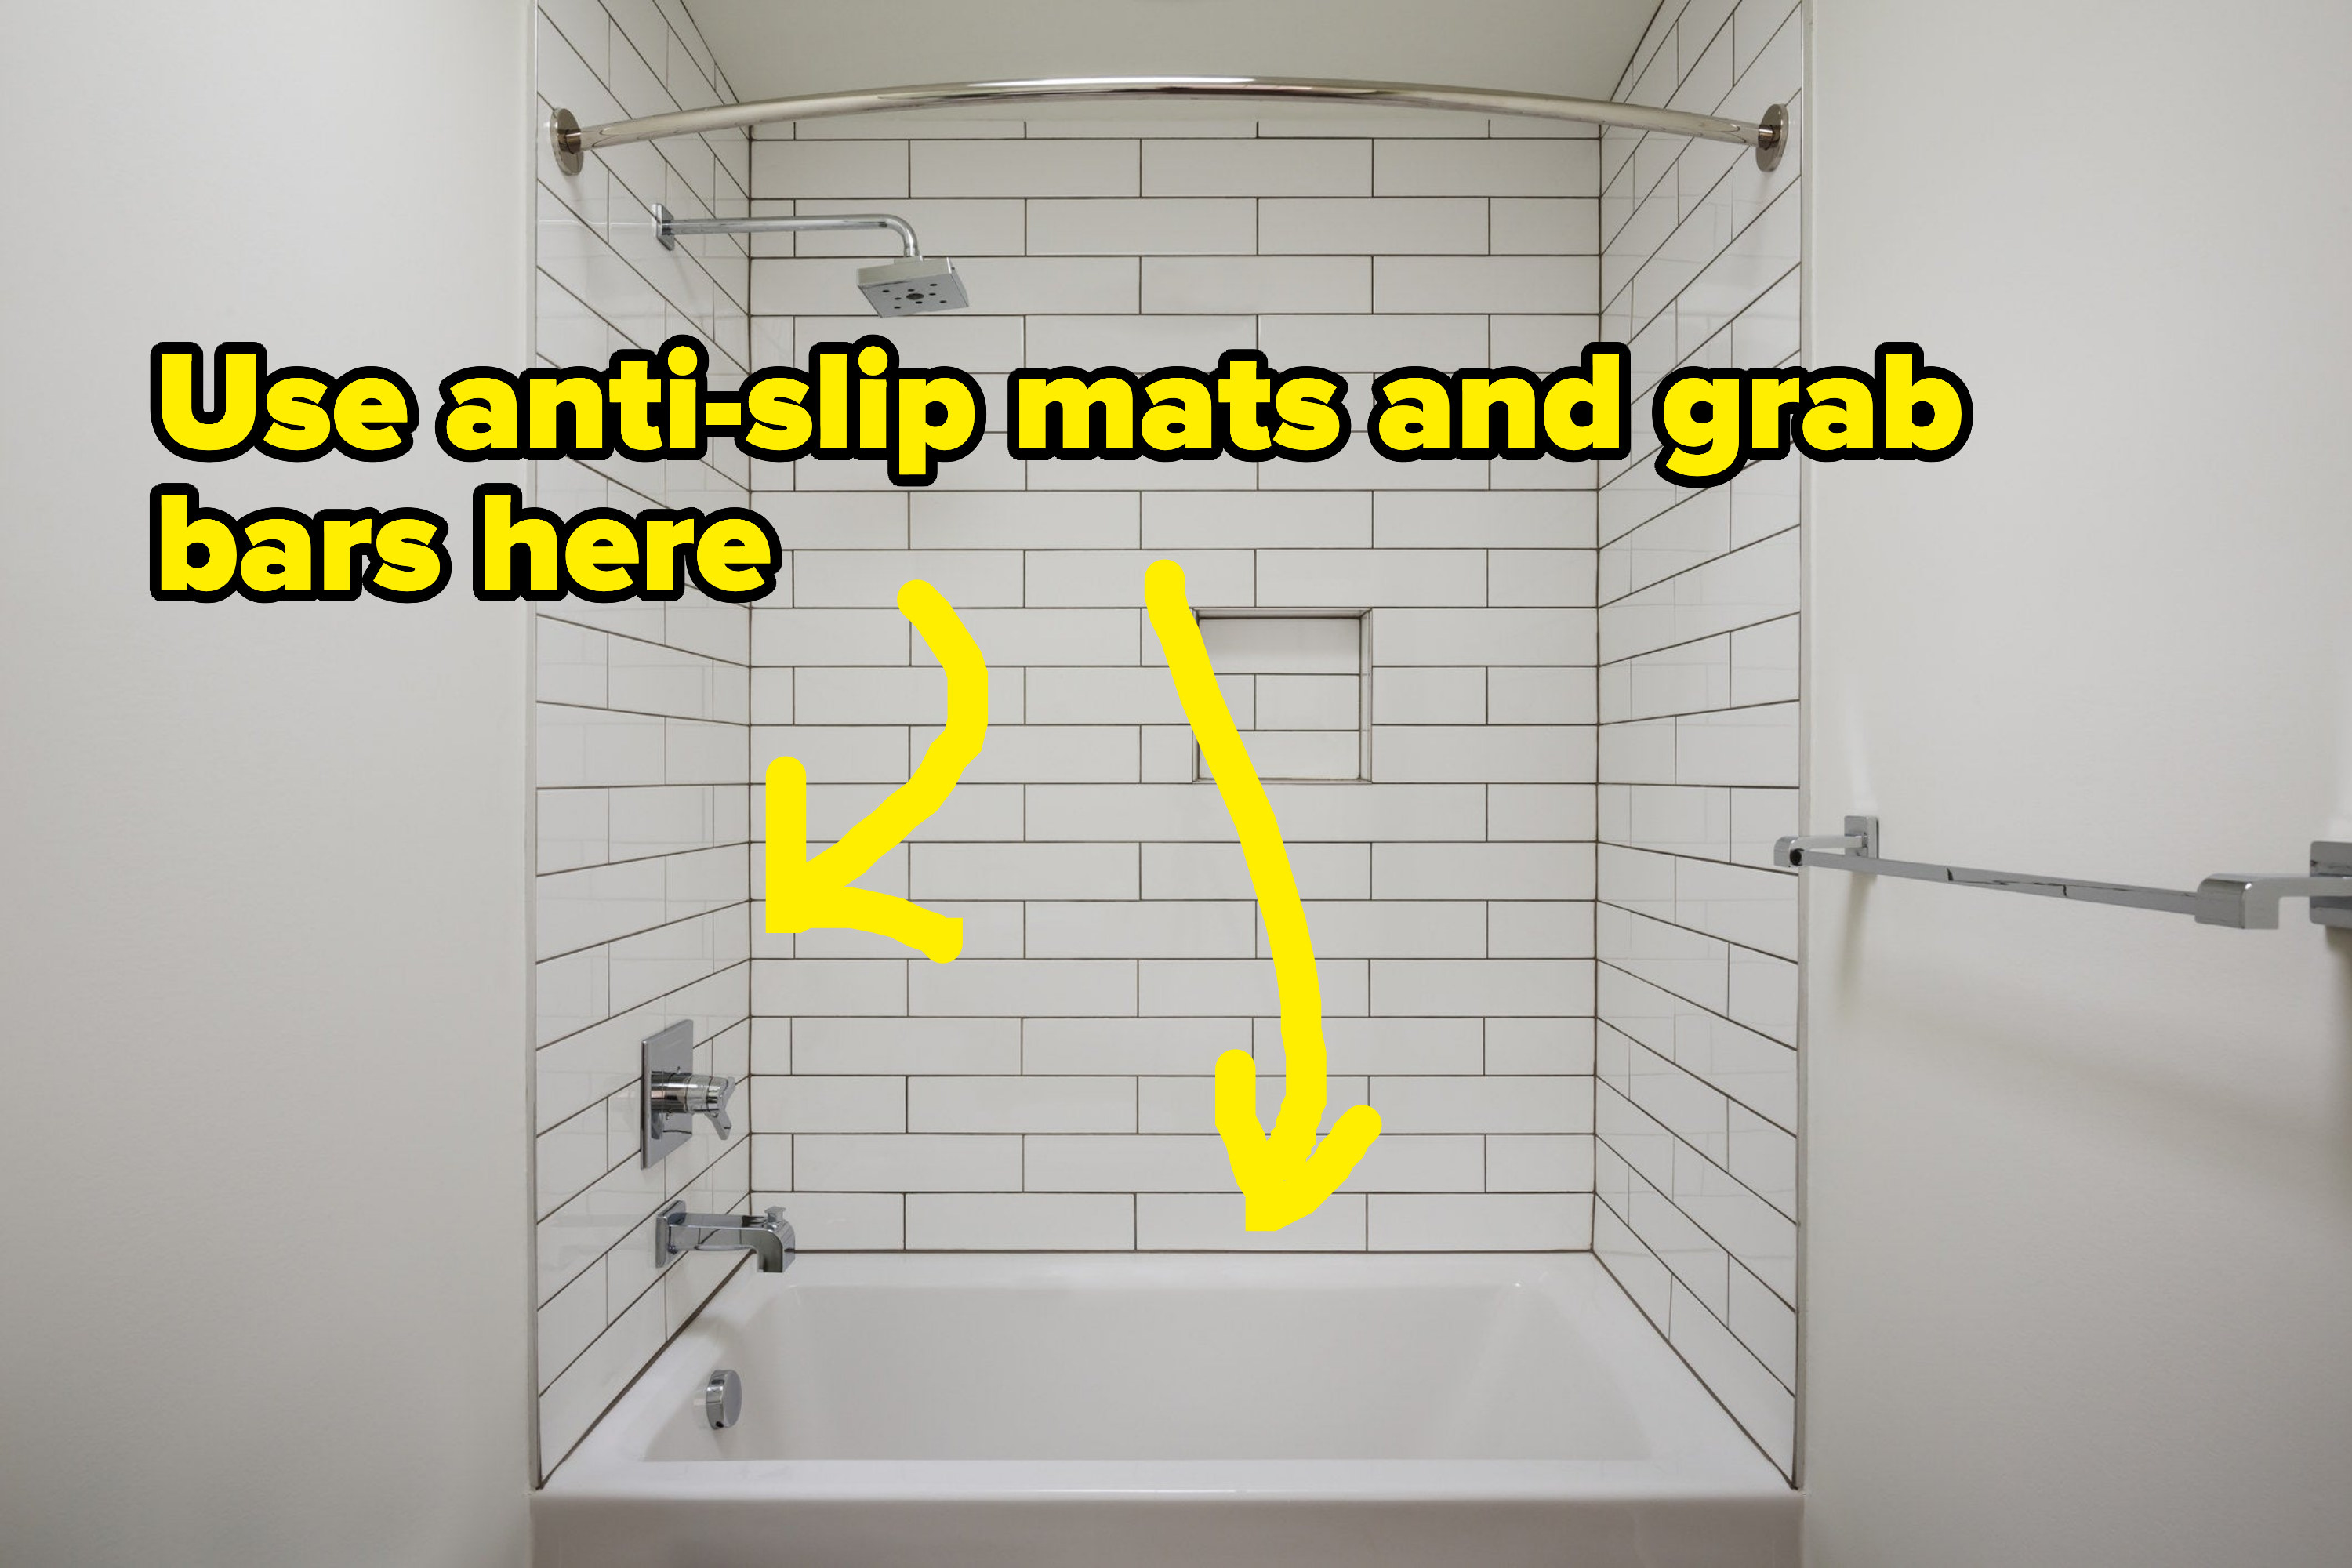 arrows pointing to sections of the bathtub with text, use anti-slip mats and grab bars here